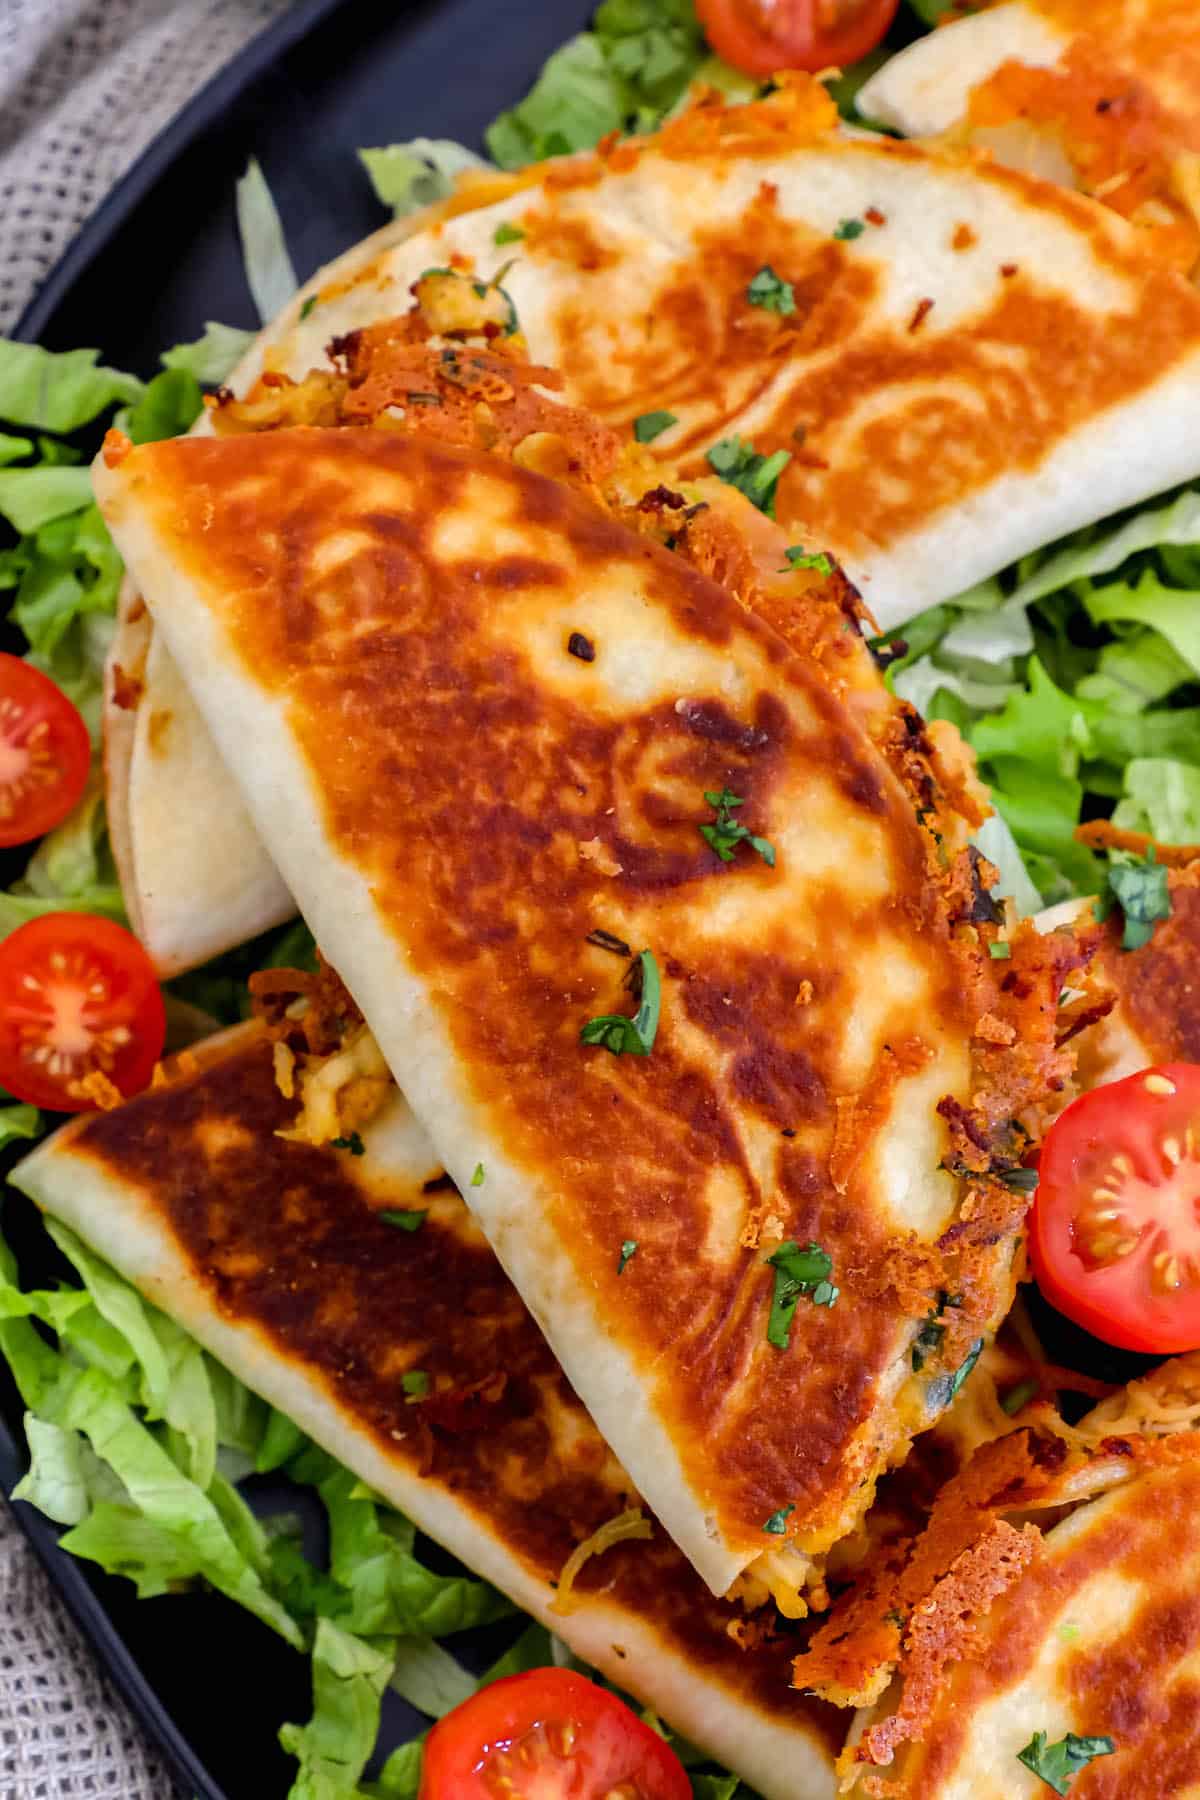 Mini chicken quesadillas on a plate with tomatoes and lettuce.